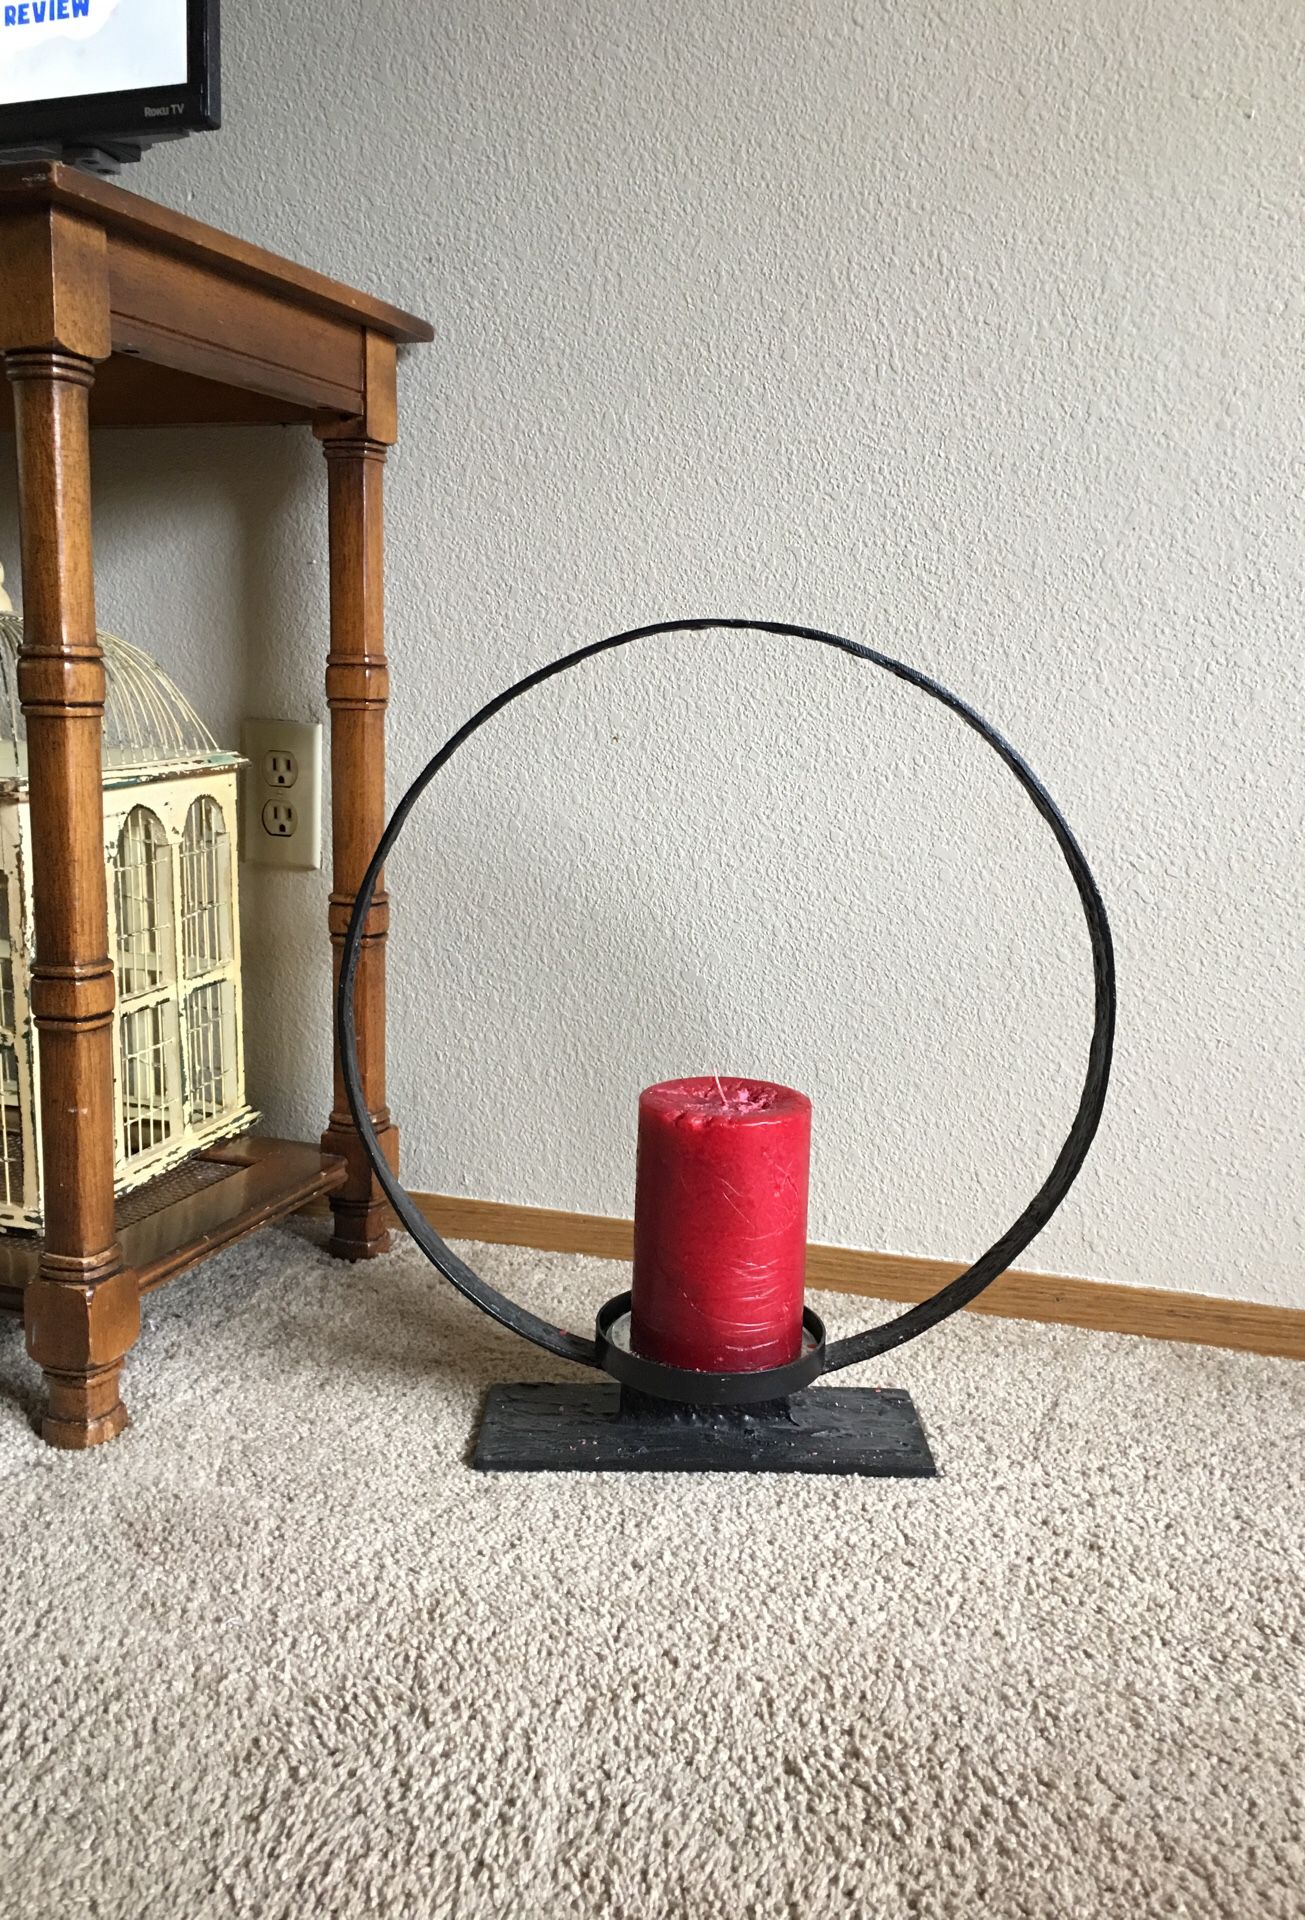 Ring Pillar Candle holder from Pottery Barn